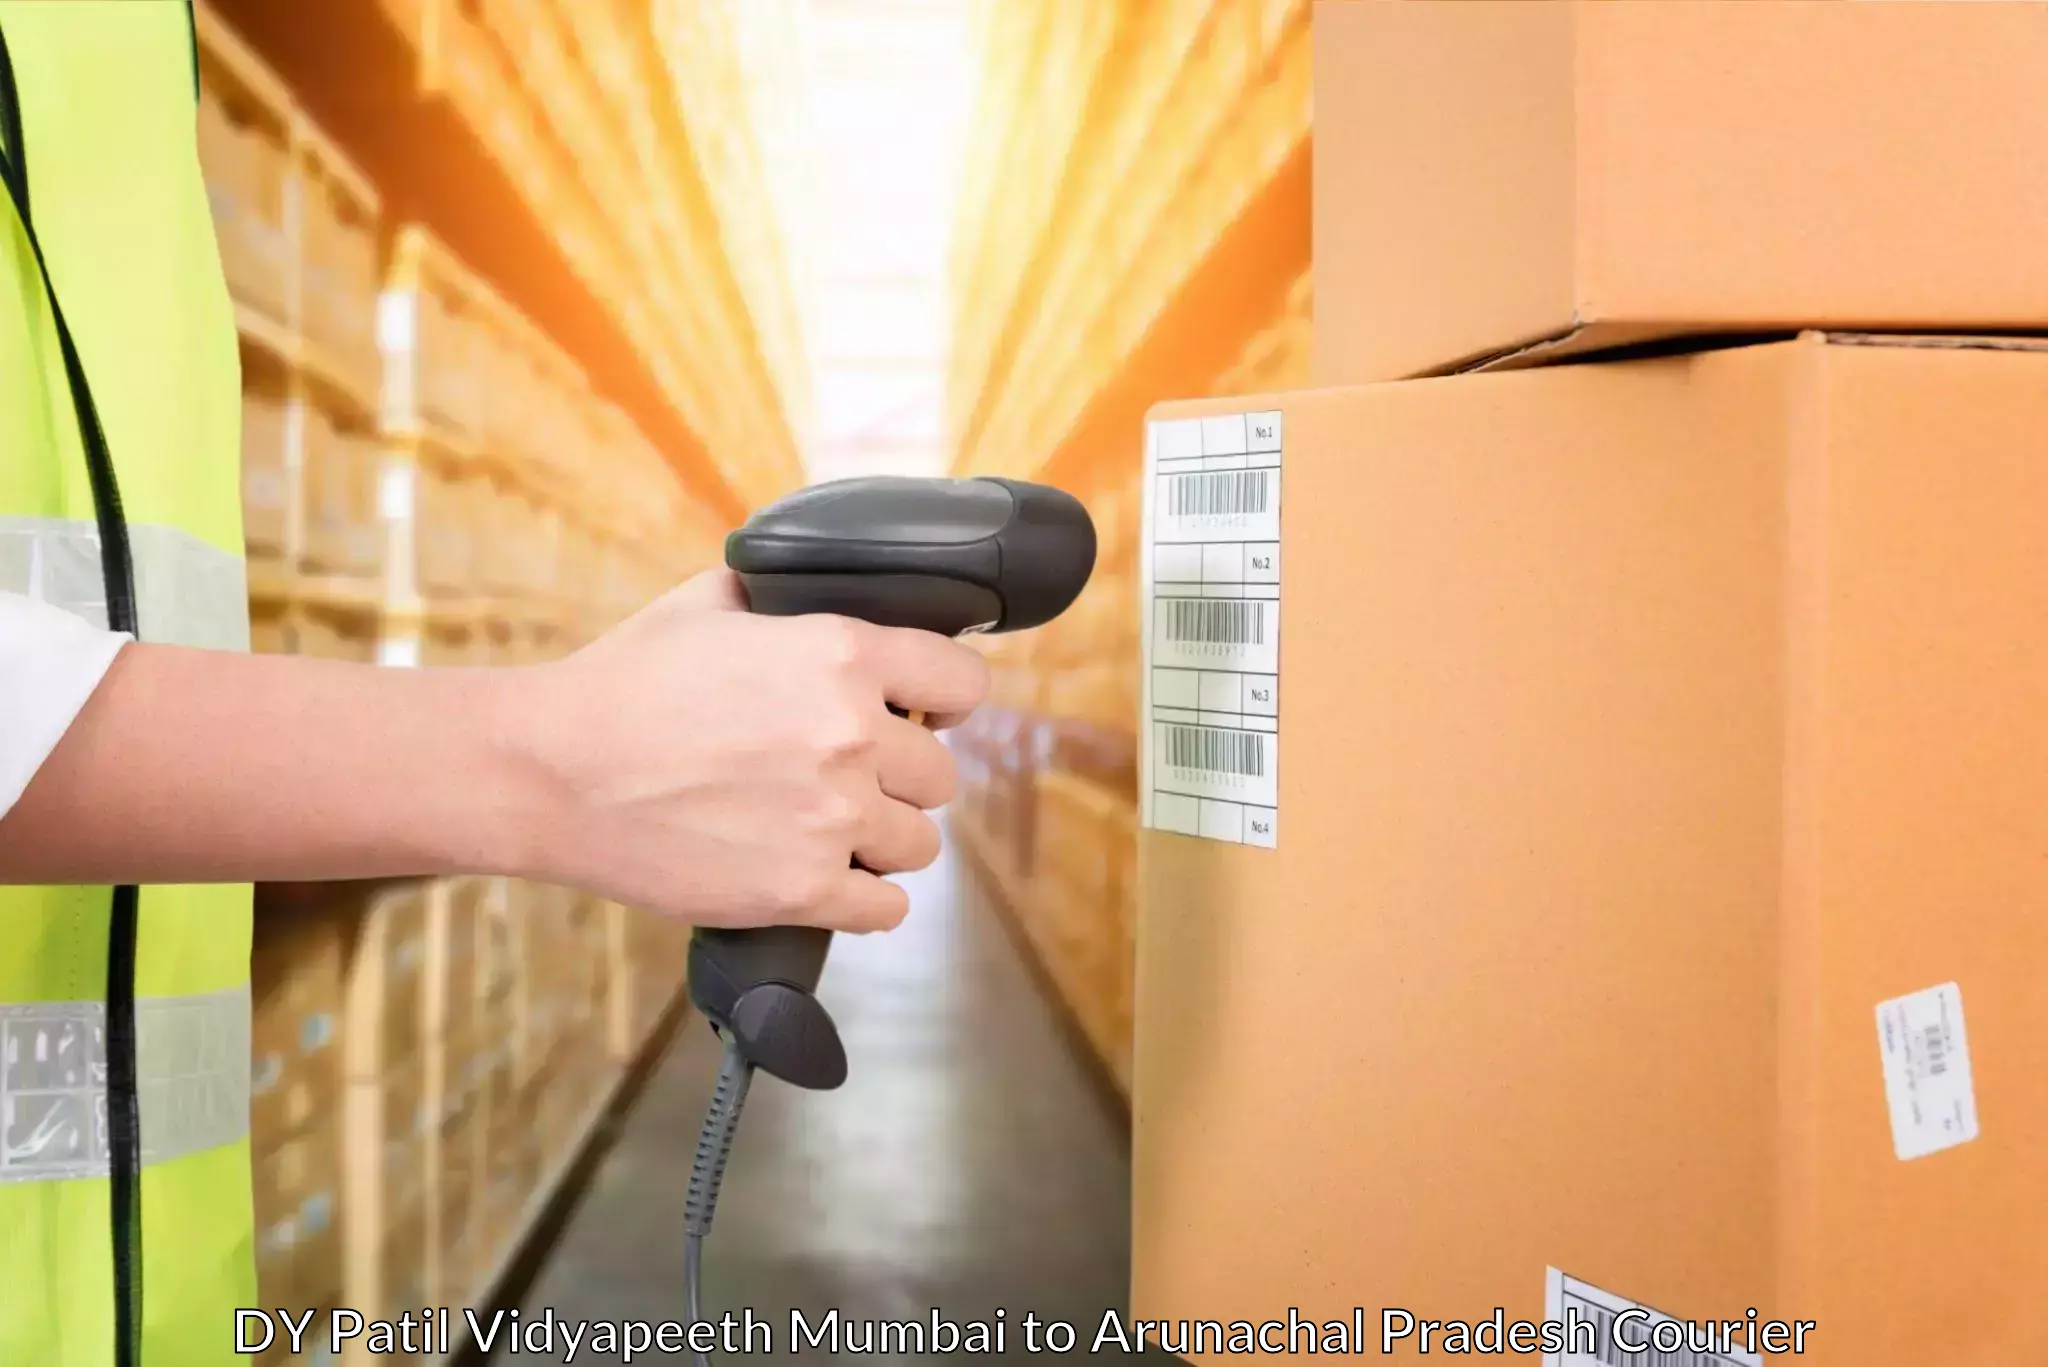 Reliable package handling in DY Patil Vidyapeeth Mumbai to Aalo